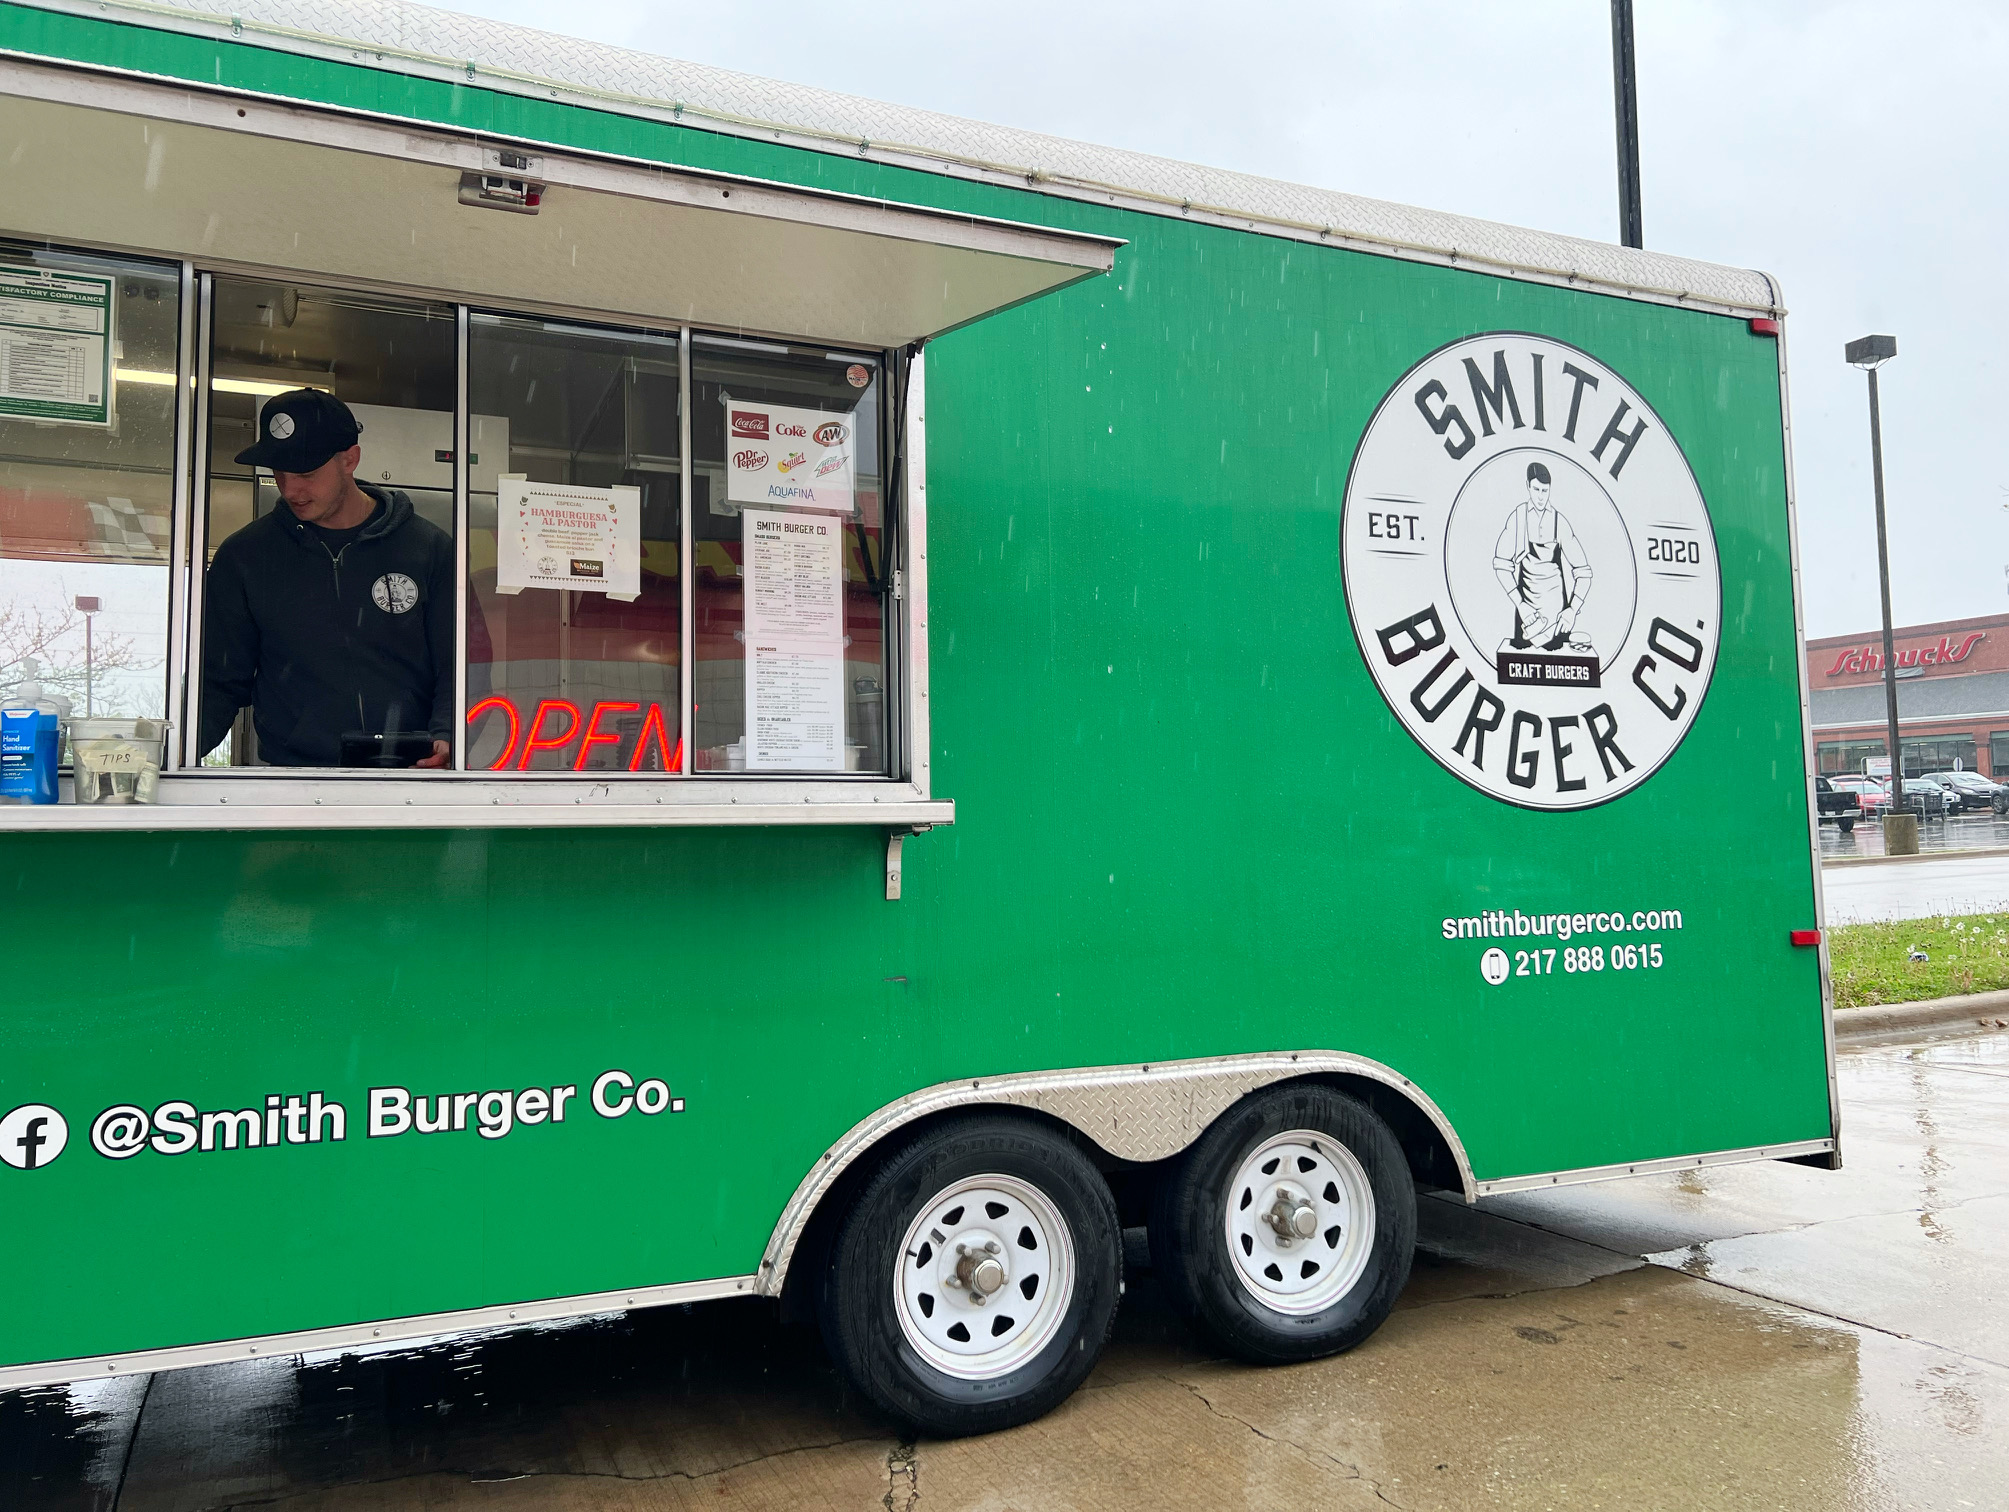 In a green food truck, there is a white man in a black hat and black hoodie. The green truck is Smith Burger Co, and the social media and company logo are printed on the side of the truck in white font. Photo by Alyssa Buckley.